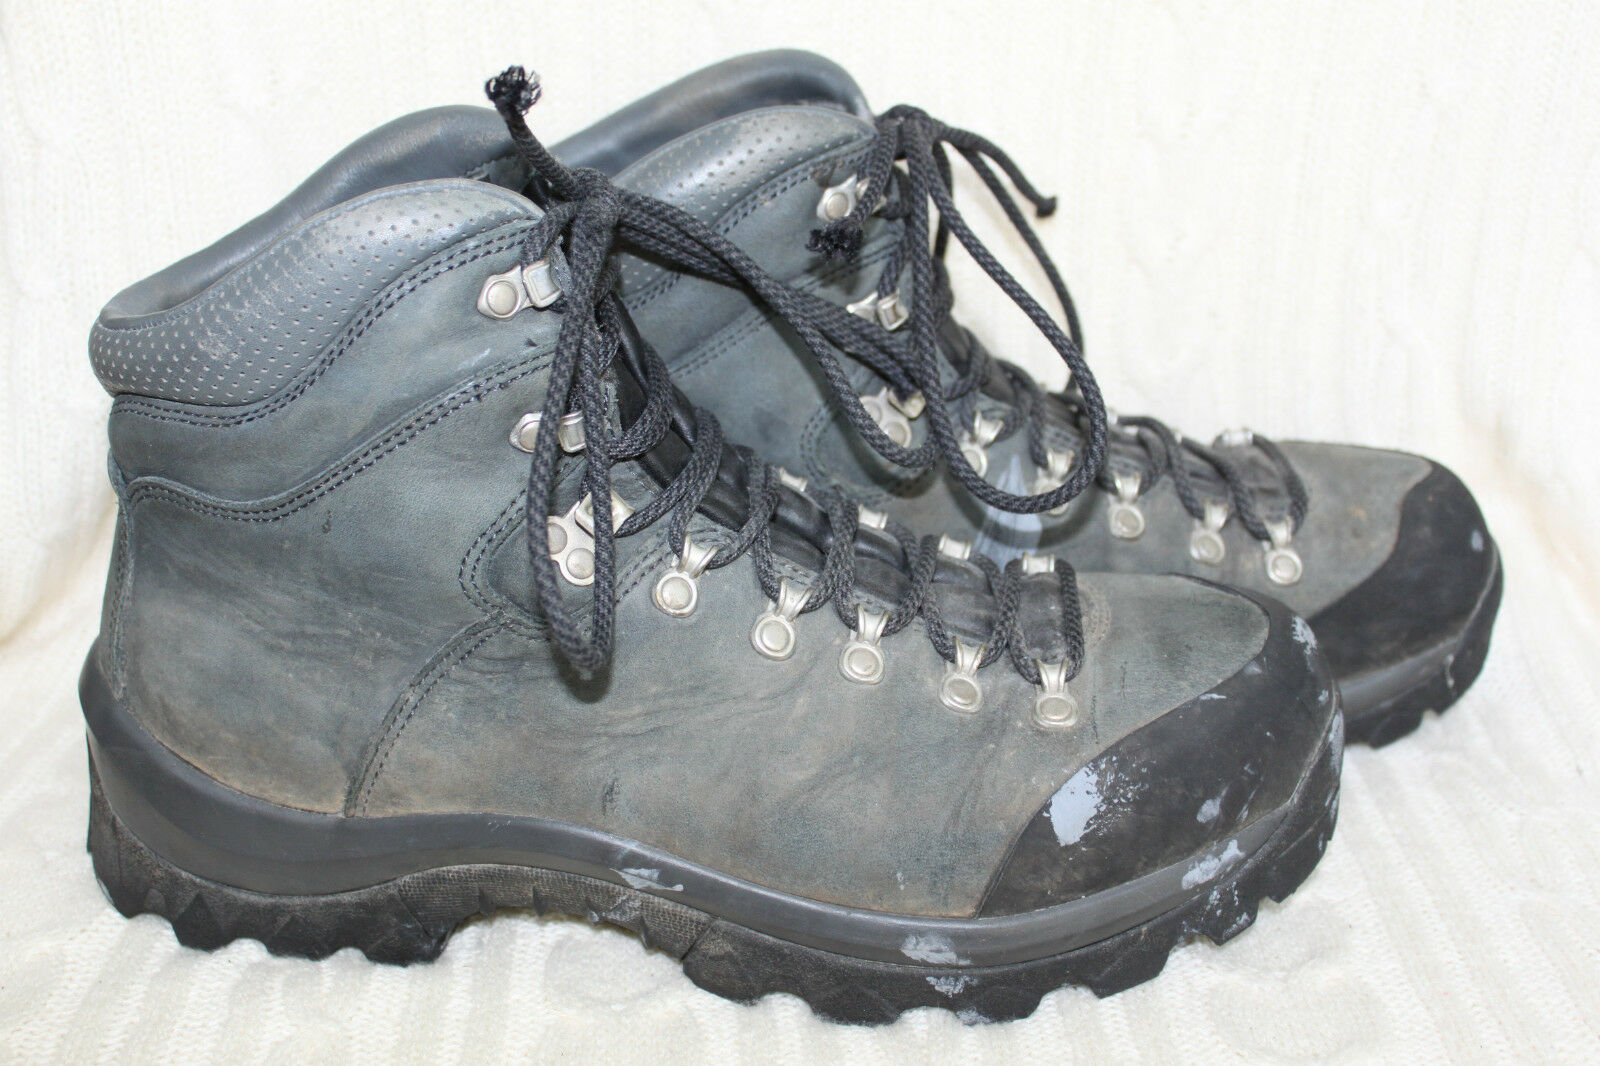 MEC Purcell Leather Hiking Boots Hyper Grip Soles Size 11.5